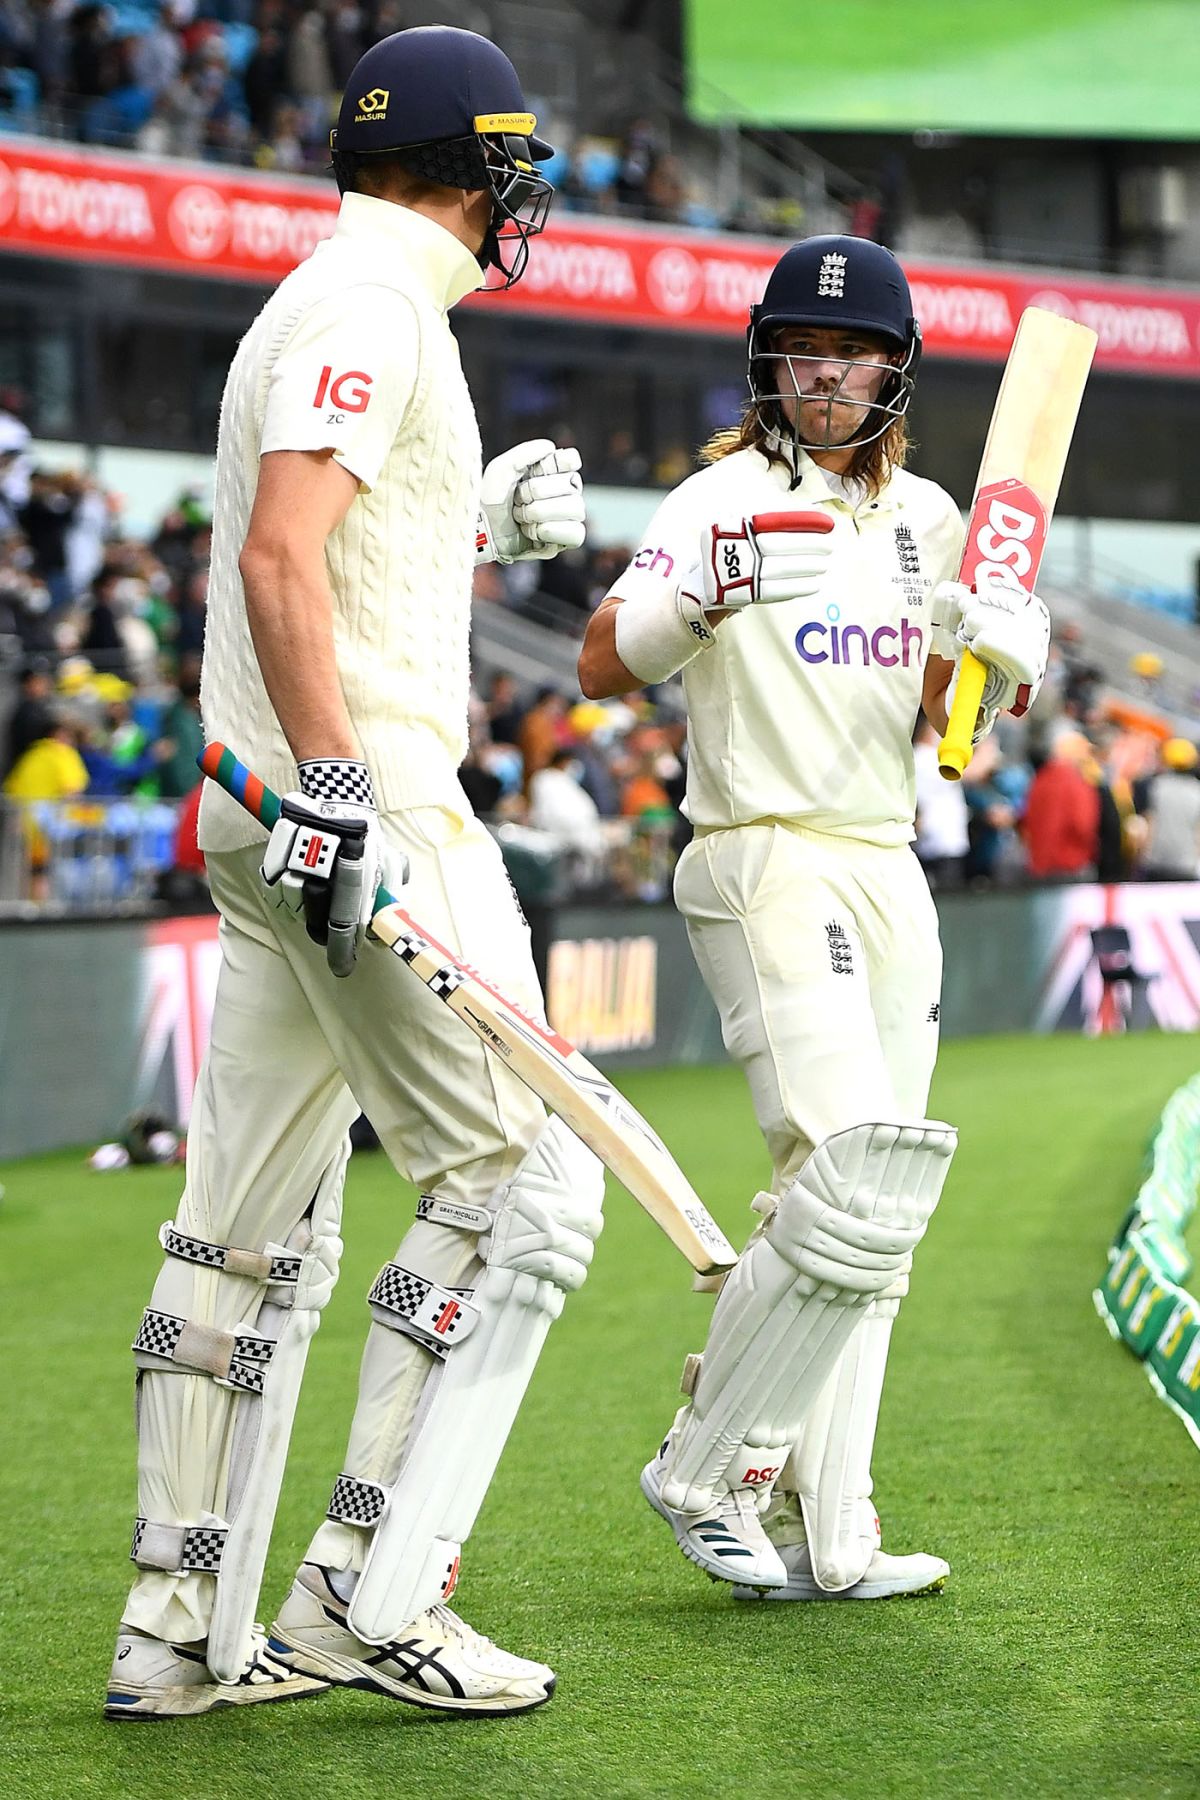 Rory Burns and Zak Crawley walk out to bat, Australia vs England, Men's Ashes, 5th Test, 3rd day, Hobart, January 16, 2021